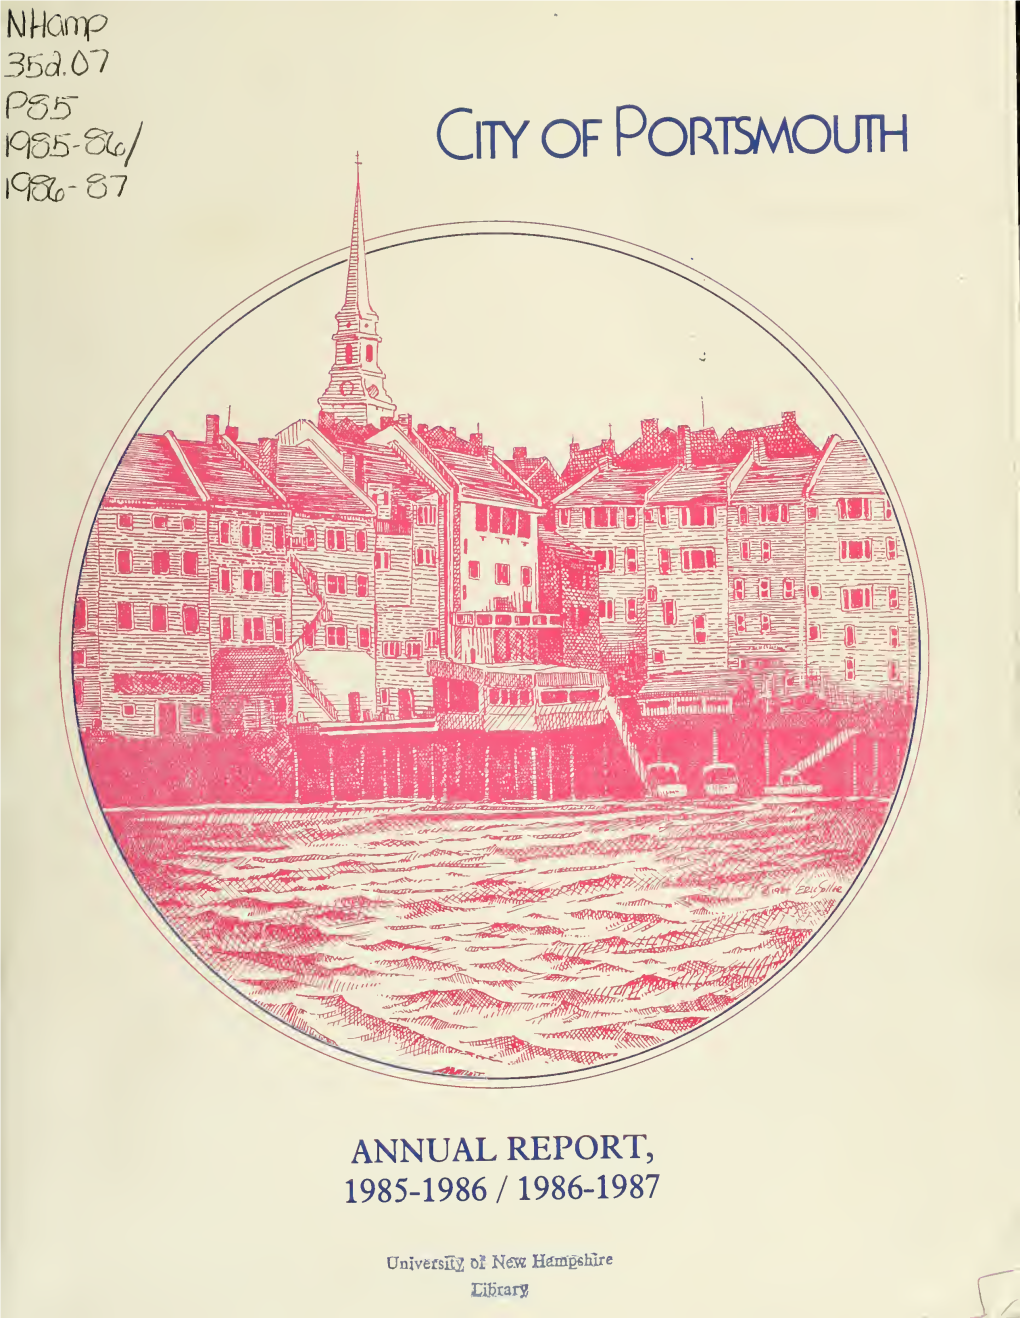 City of Portsmouth Annual Report 1985-1986, 1986-1987